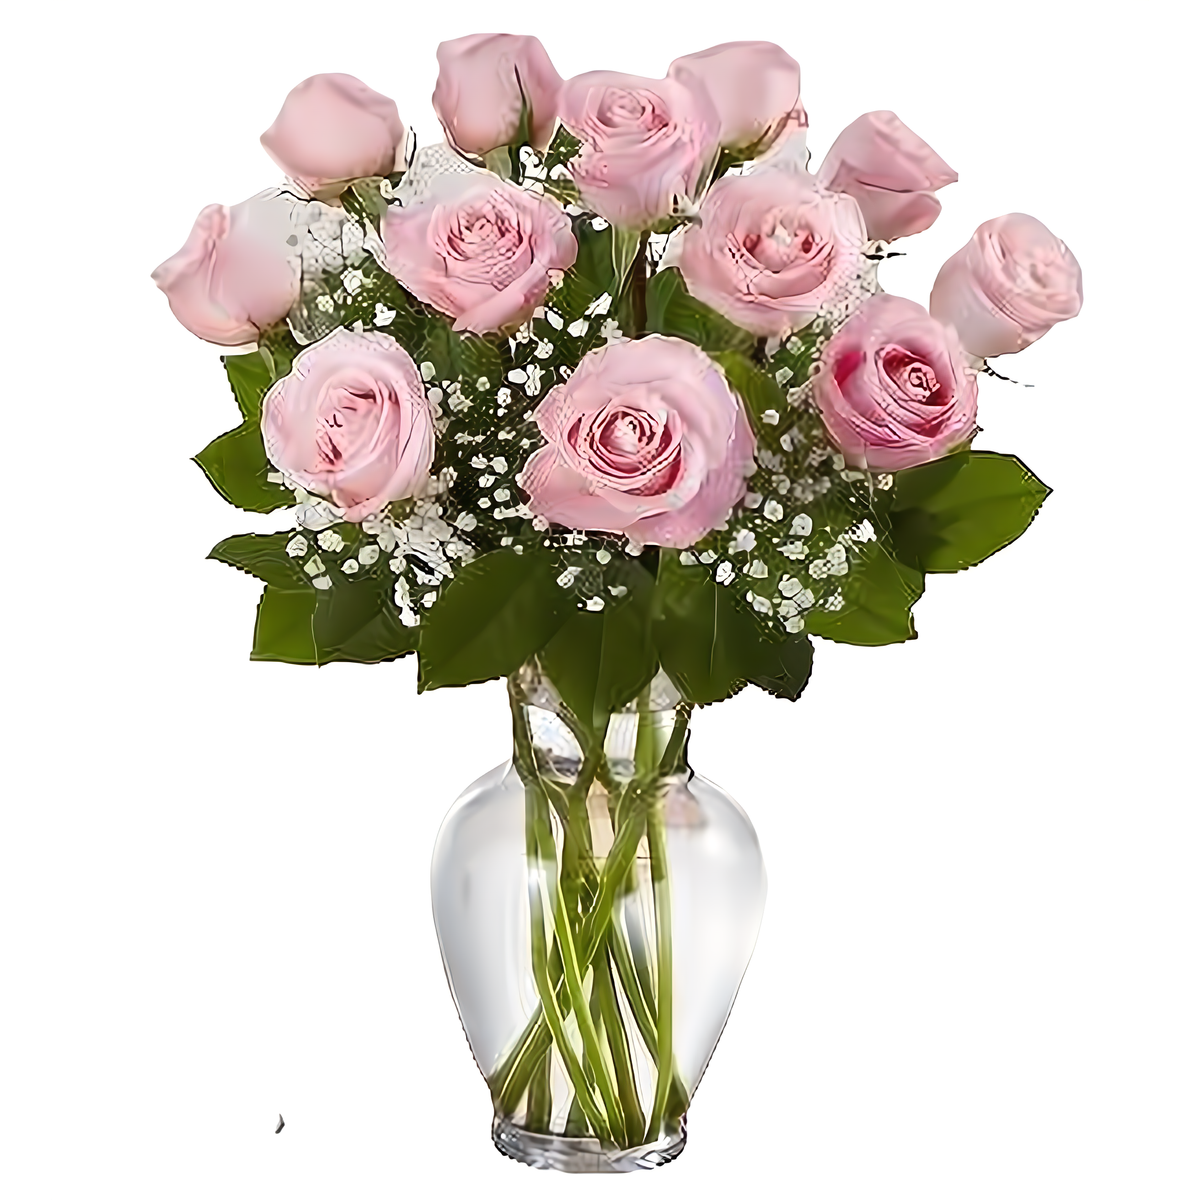 Queens Flower Delivery - Premium Long Stem Pink Roses